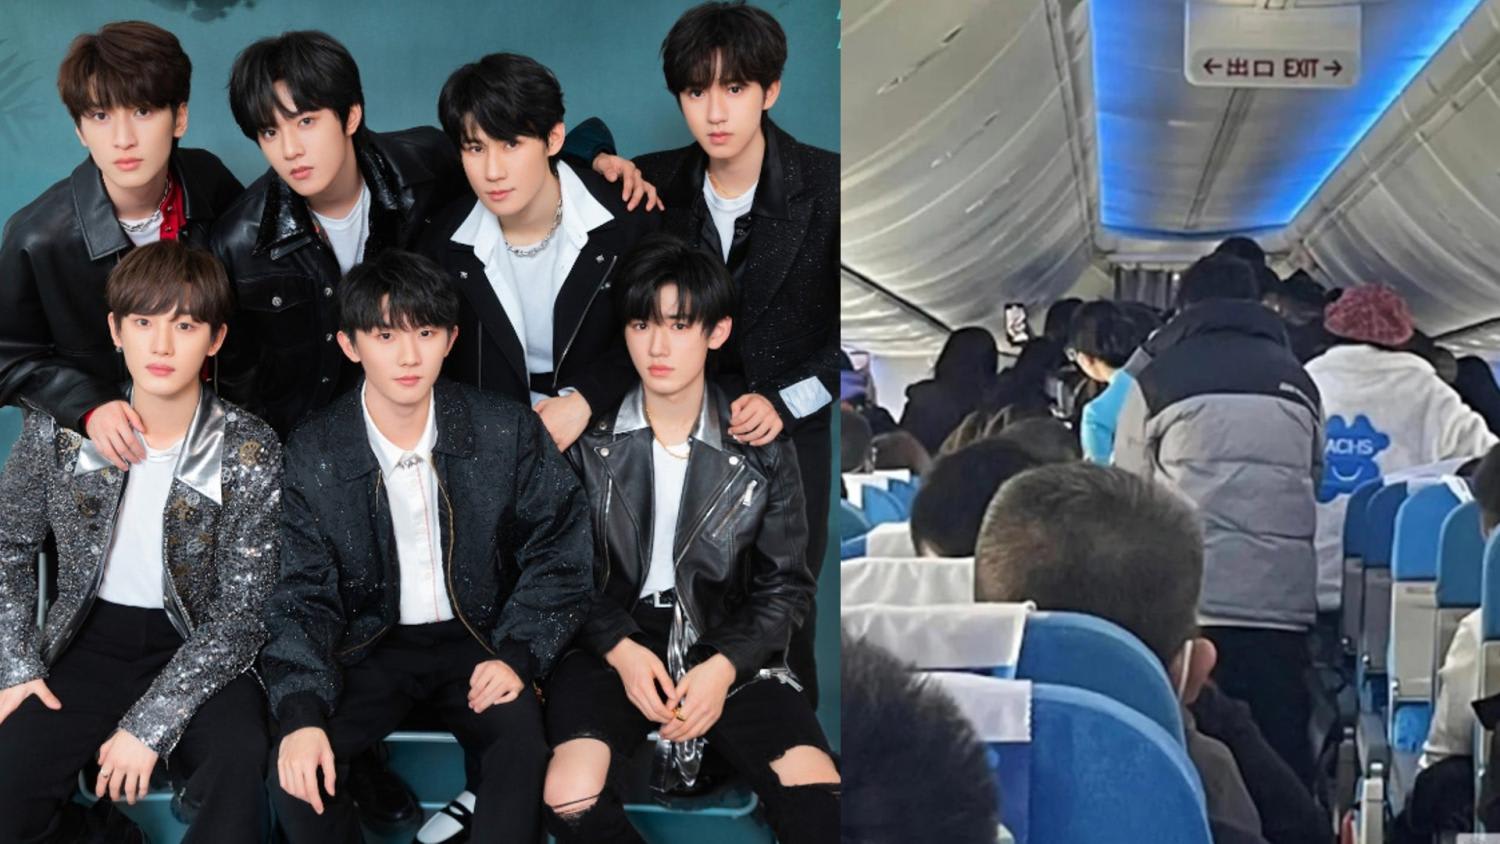 Fans Of Chinese Boyband TNT Likened To Zombies After Rushing Into Plane Cabin Where The Boys Were Seated... While The Plane Was Still Moving